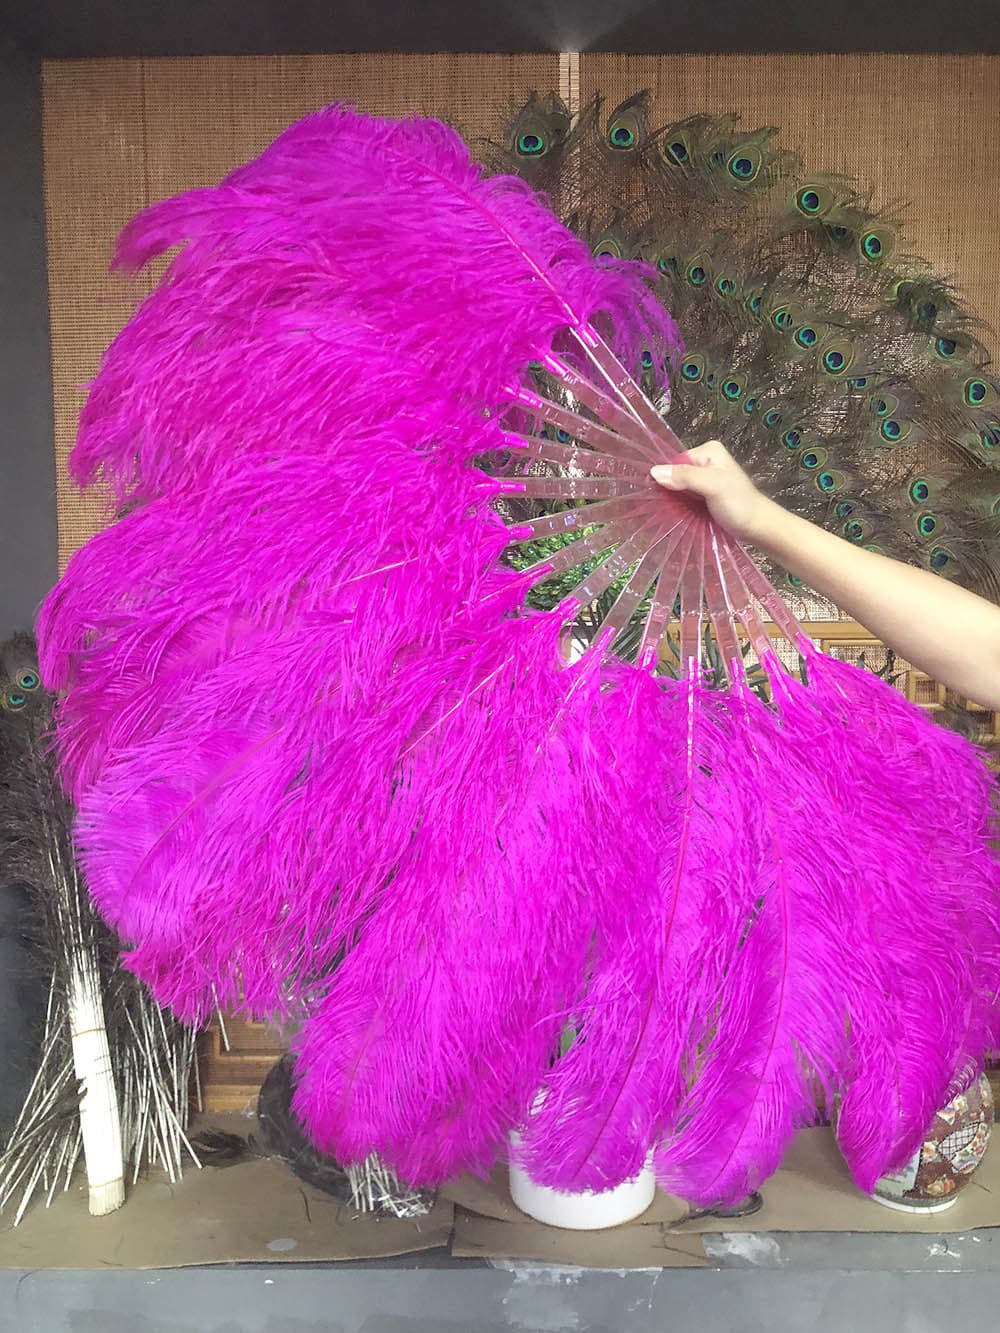 hotfans Burlesque 4 Layers Black Ostrich Feather Fan Opened 67'' with Travel Leather Bag Right Hand Fan